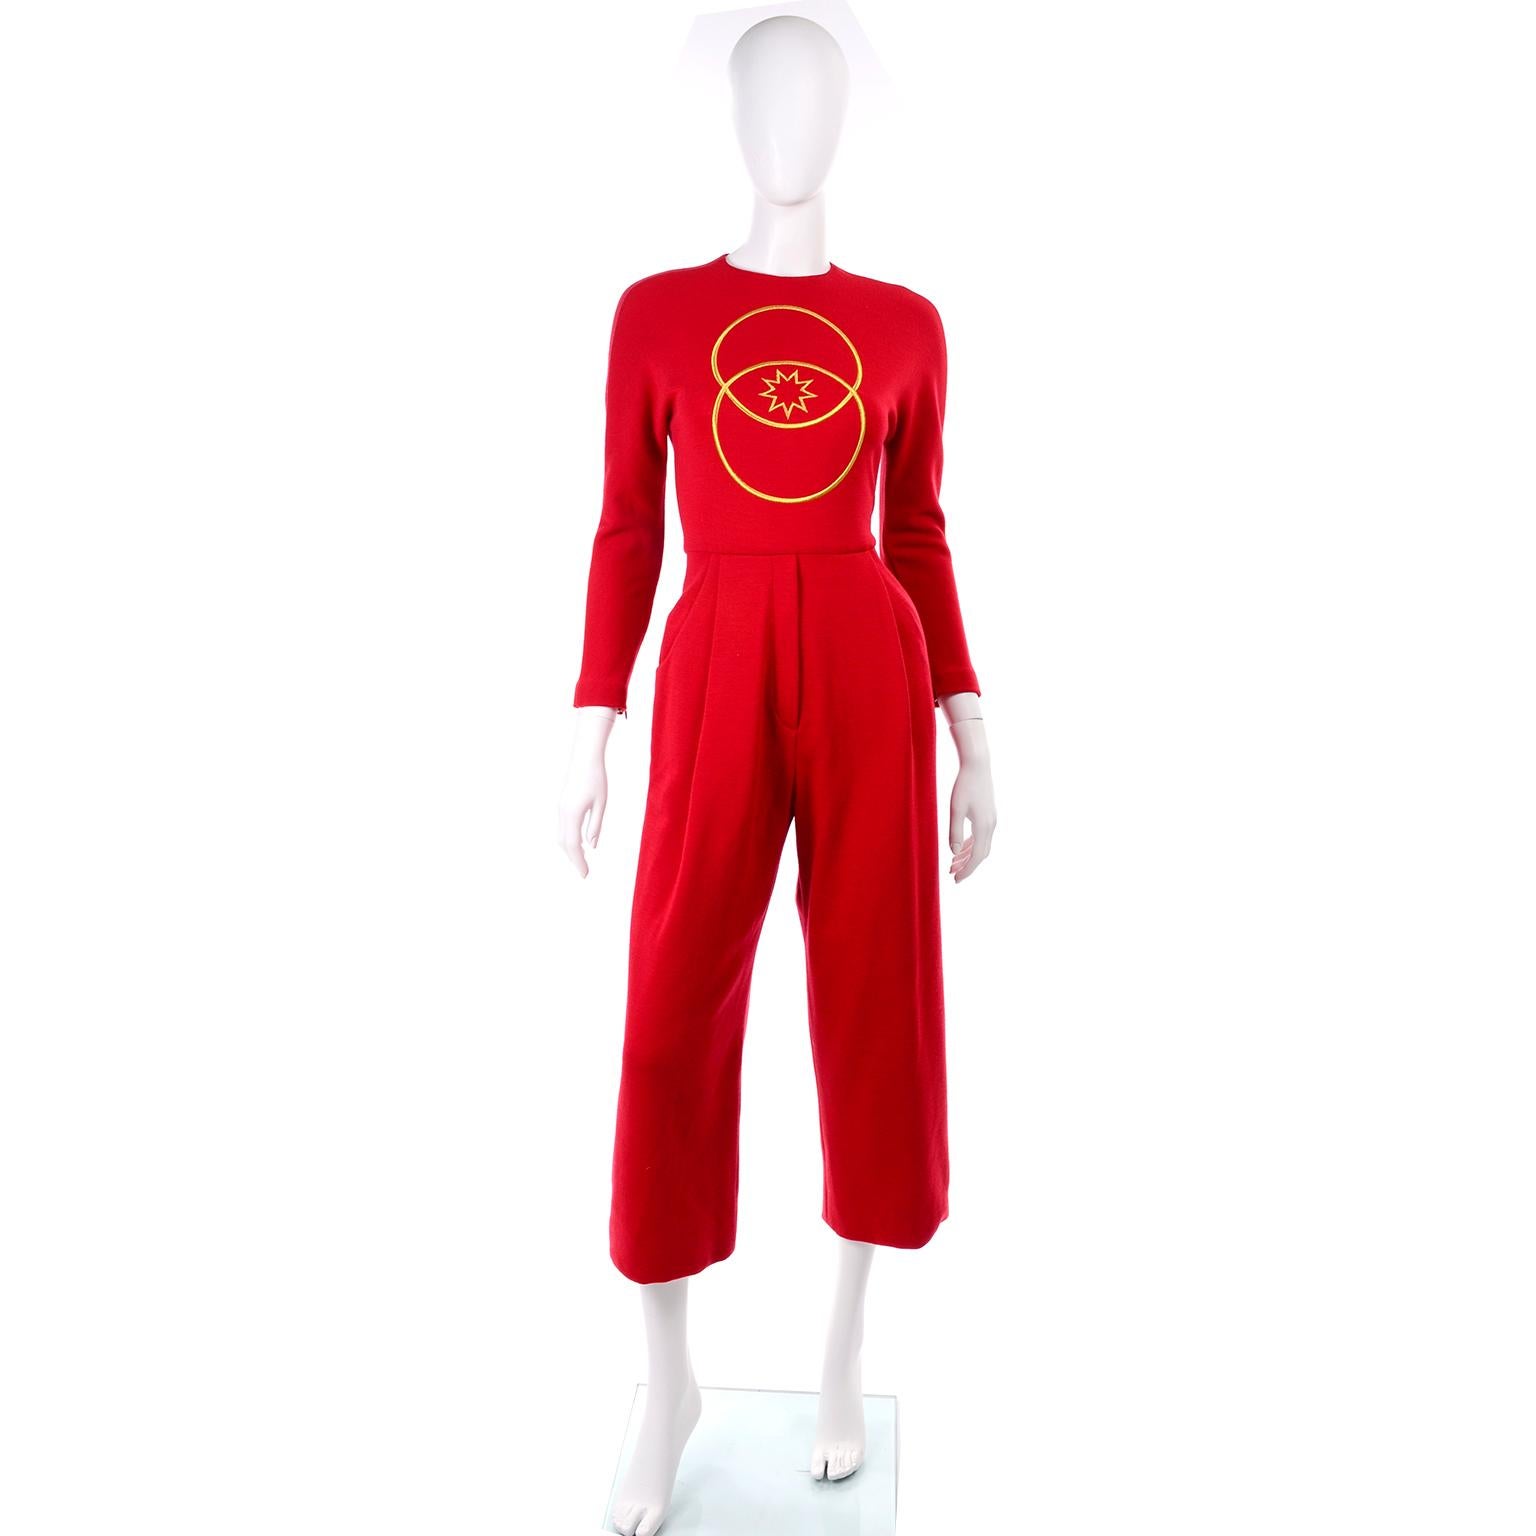 This is a fun vintage Geoffrey Beene jumpsuit in a red wool jersey knit.  This 1980's cropped wide leg jumpsuit has pockets at the pleated waist and long sleeves with zippers at the cuffs.  There is a center back zip closure and gold embroidery on